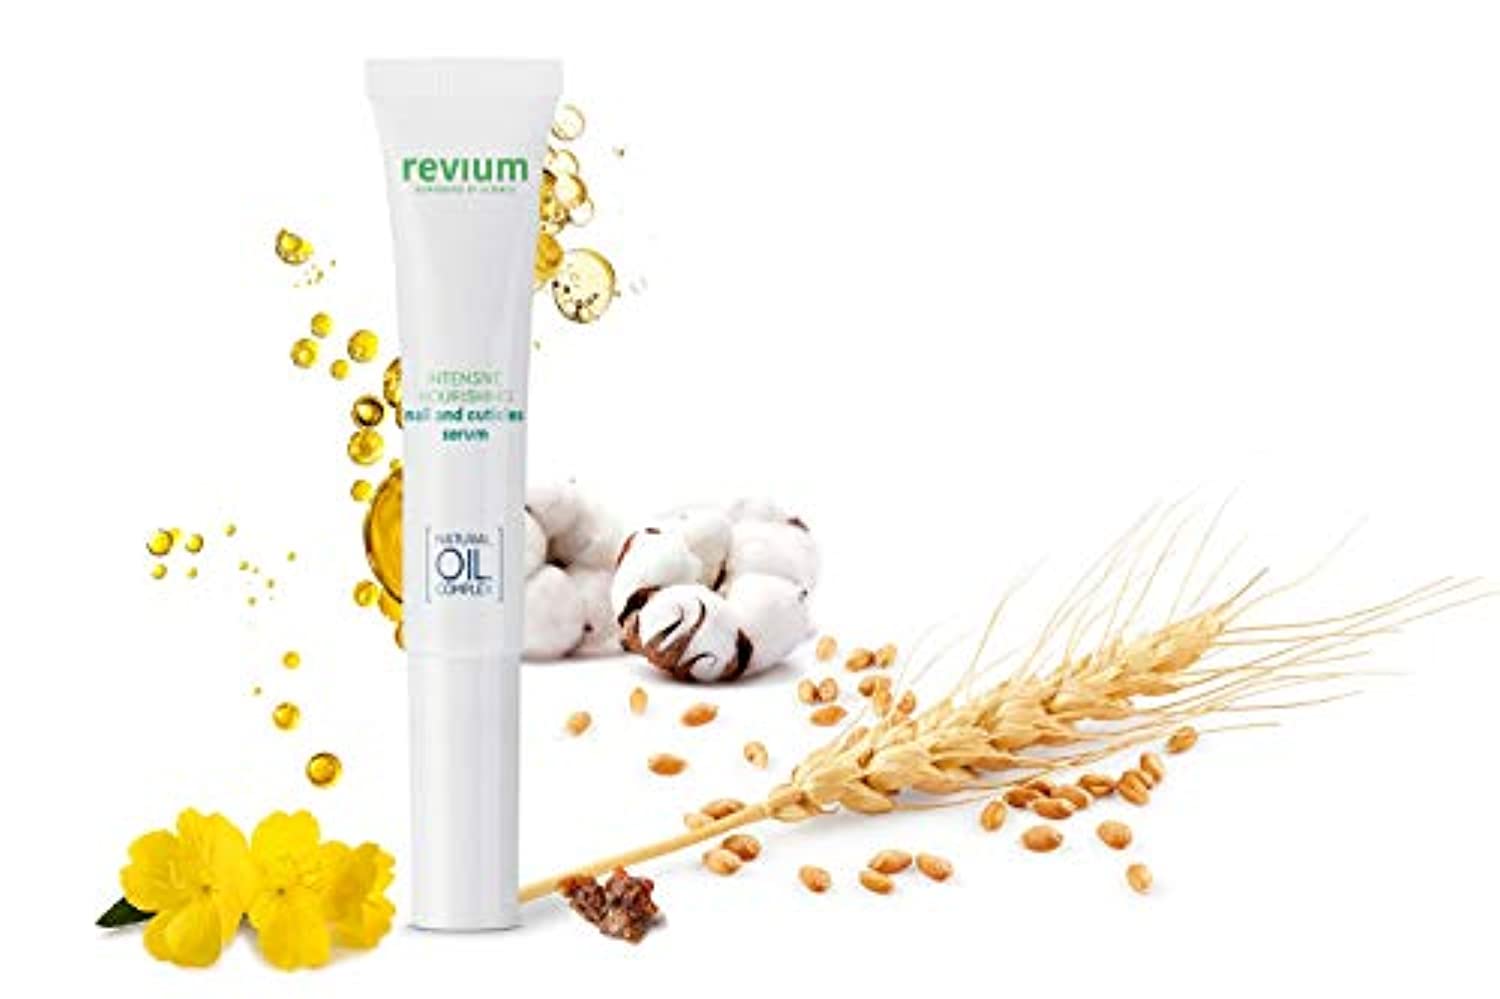 Revium Intensive Nourishing Nail And Cuticles Serum, Specialist Care Product With Myrrh, Cotton, Almond, Canola And Wheat Germ Oils, Eriched With Vitamins (A, E, F, and C), Lecithin, 7ml